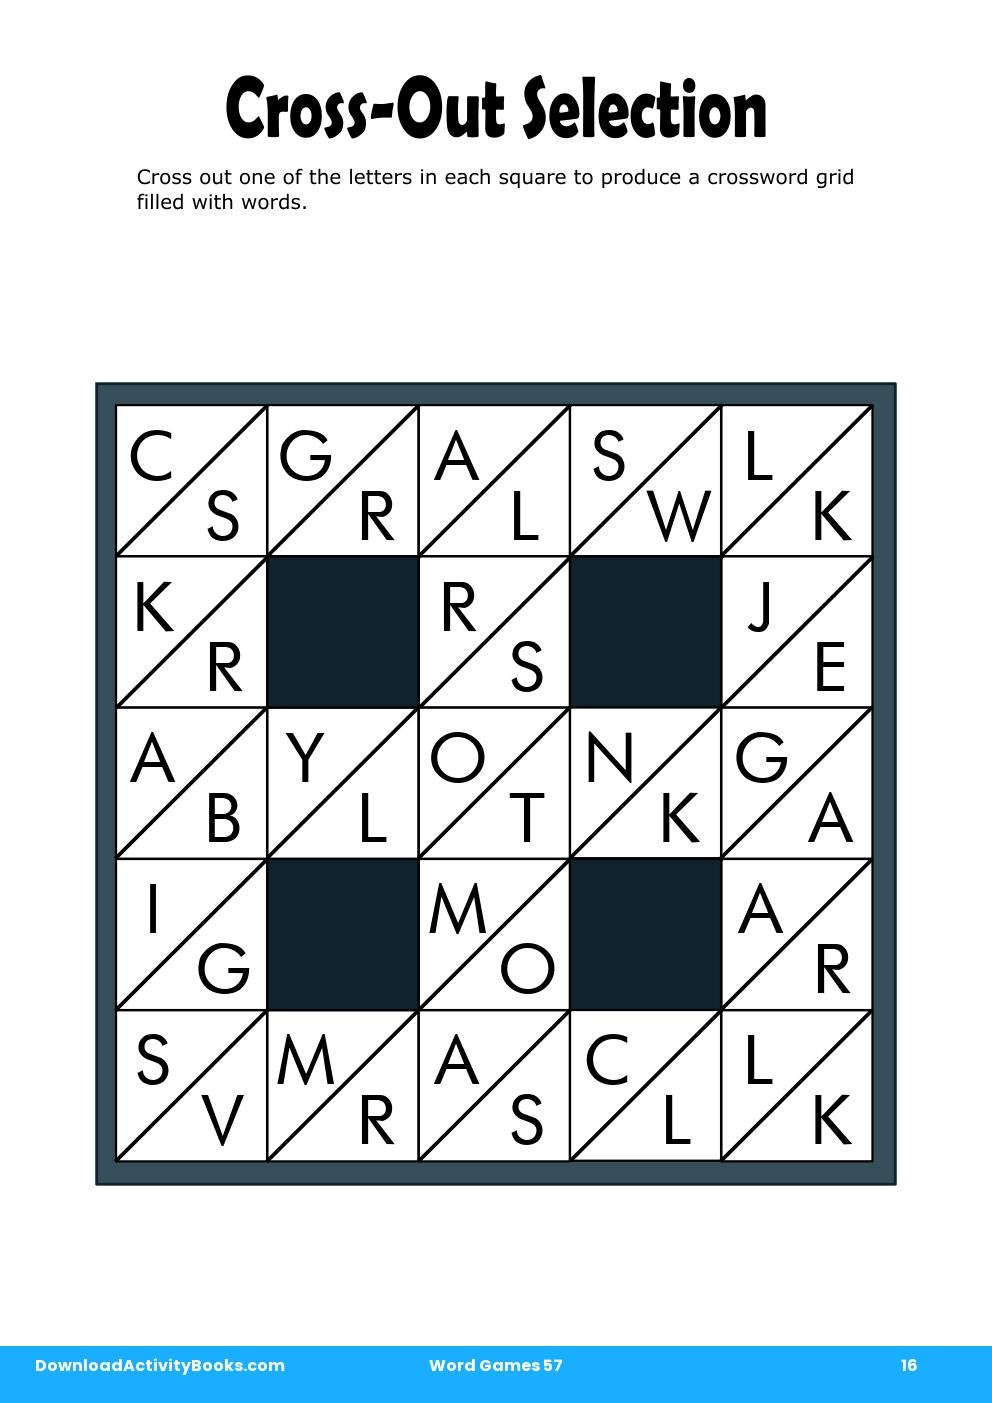 Cross-Out Selection in Word Games 57